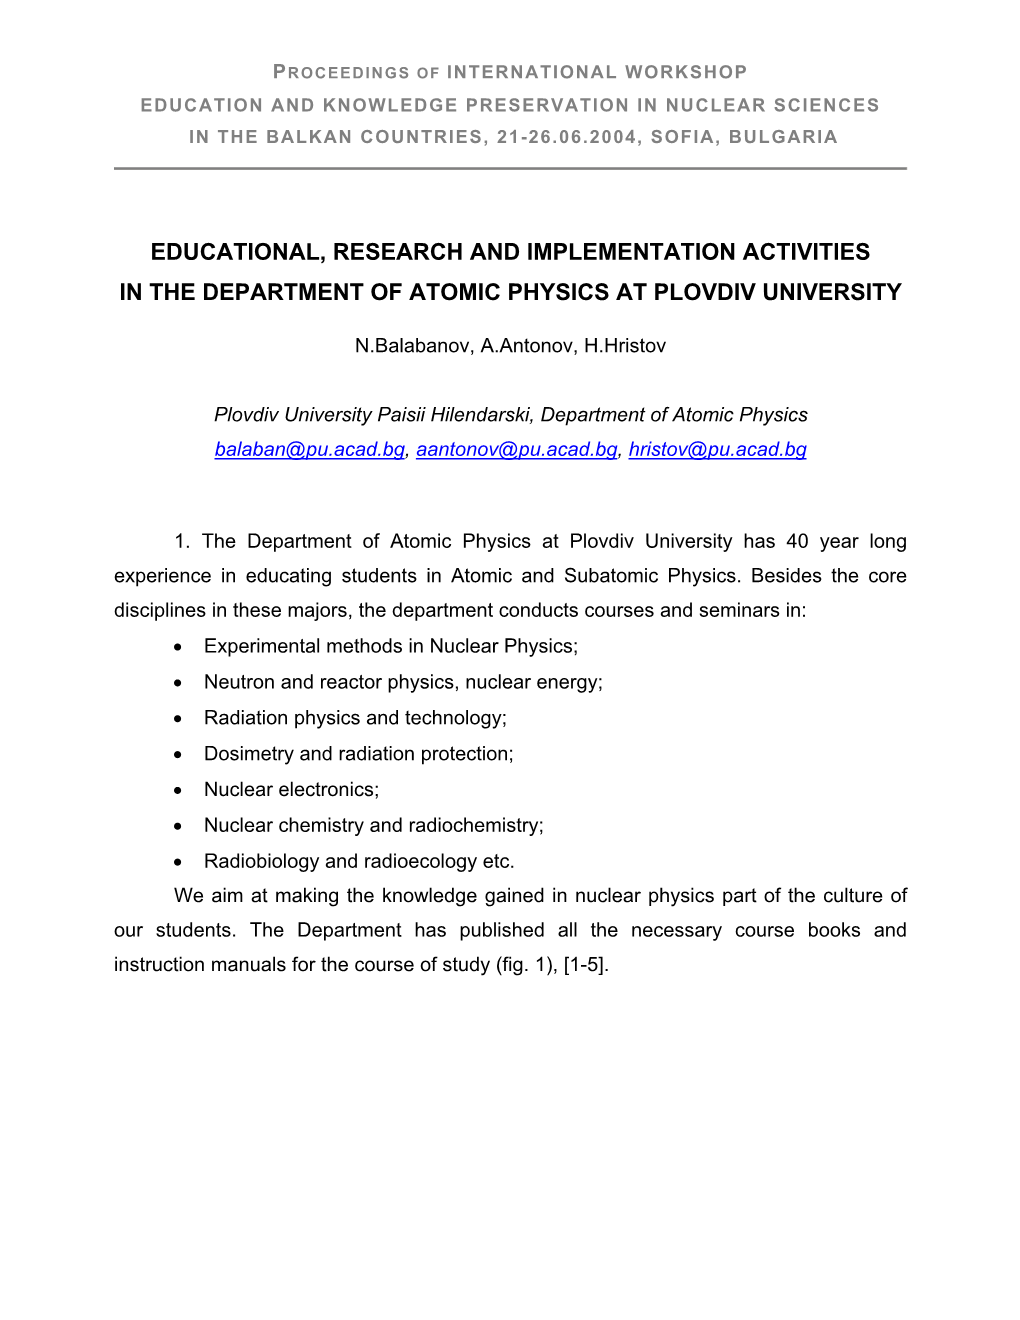 Educational, Research and Implementation Activities in the Department of Atomic Physics at Plovdiv University